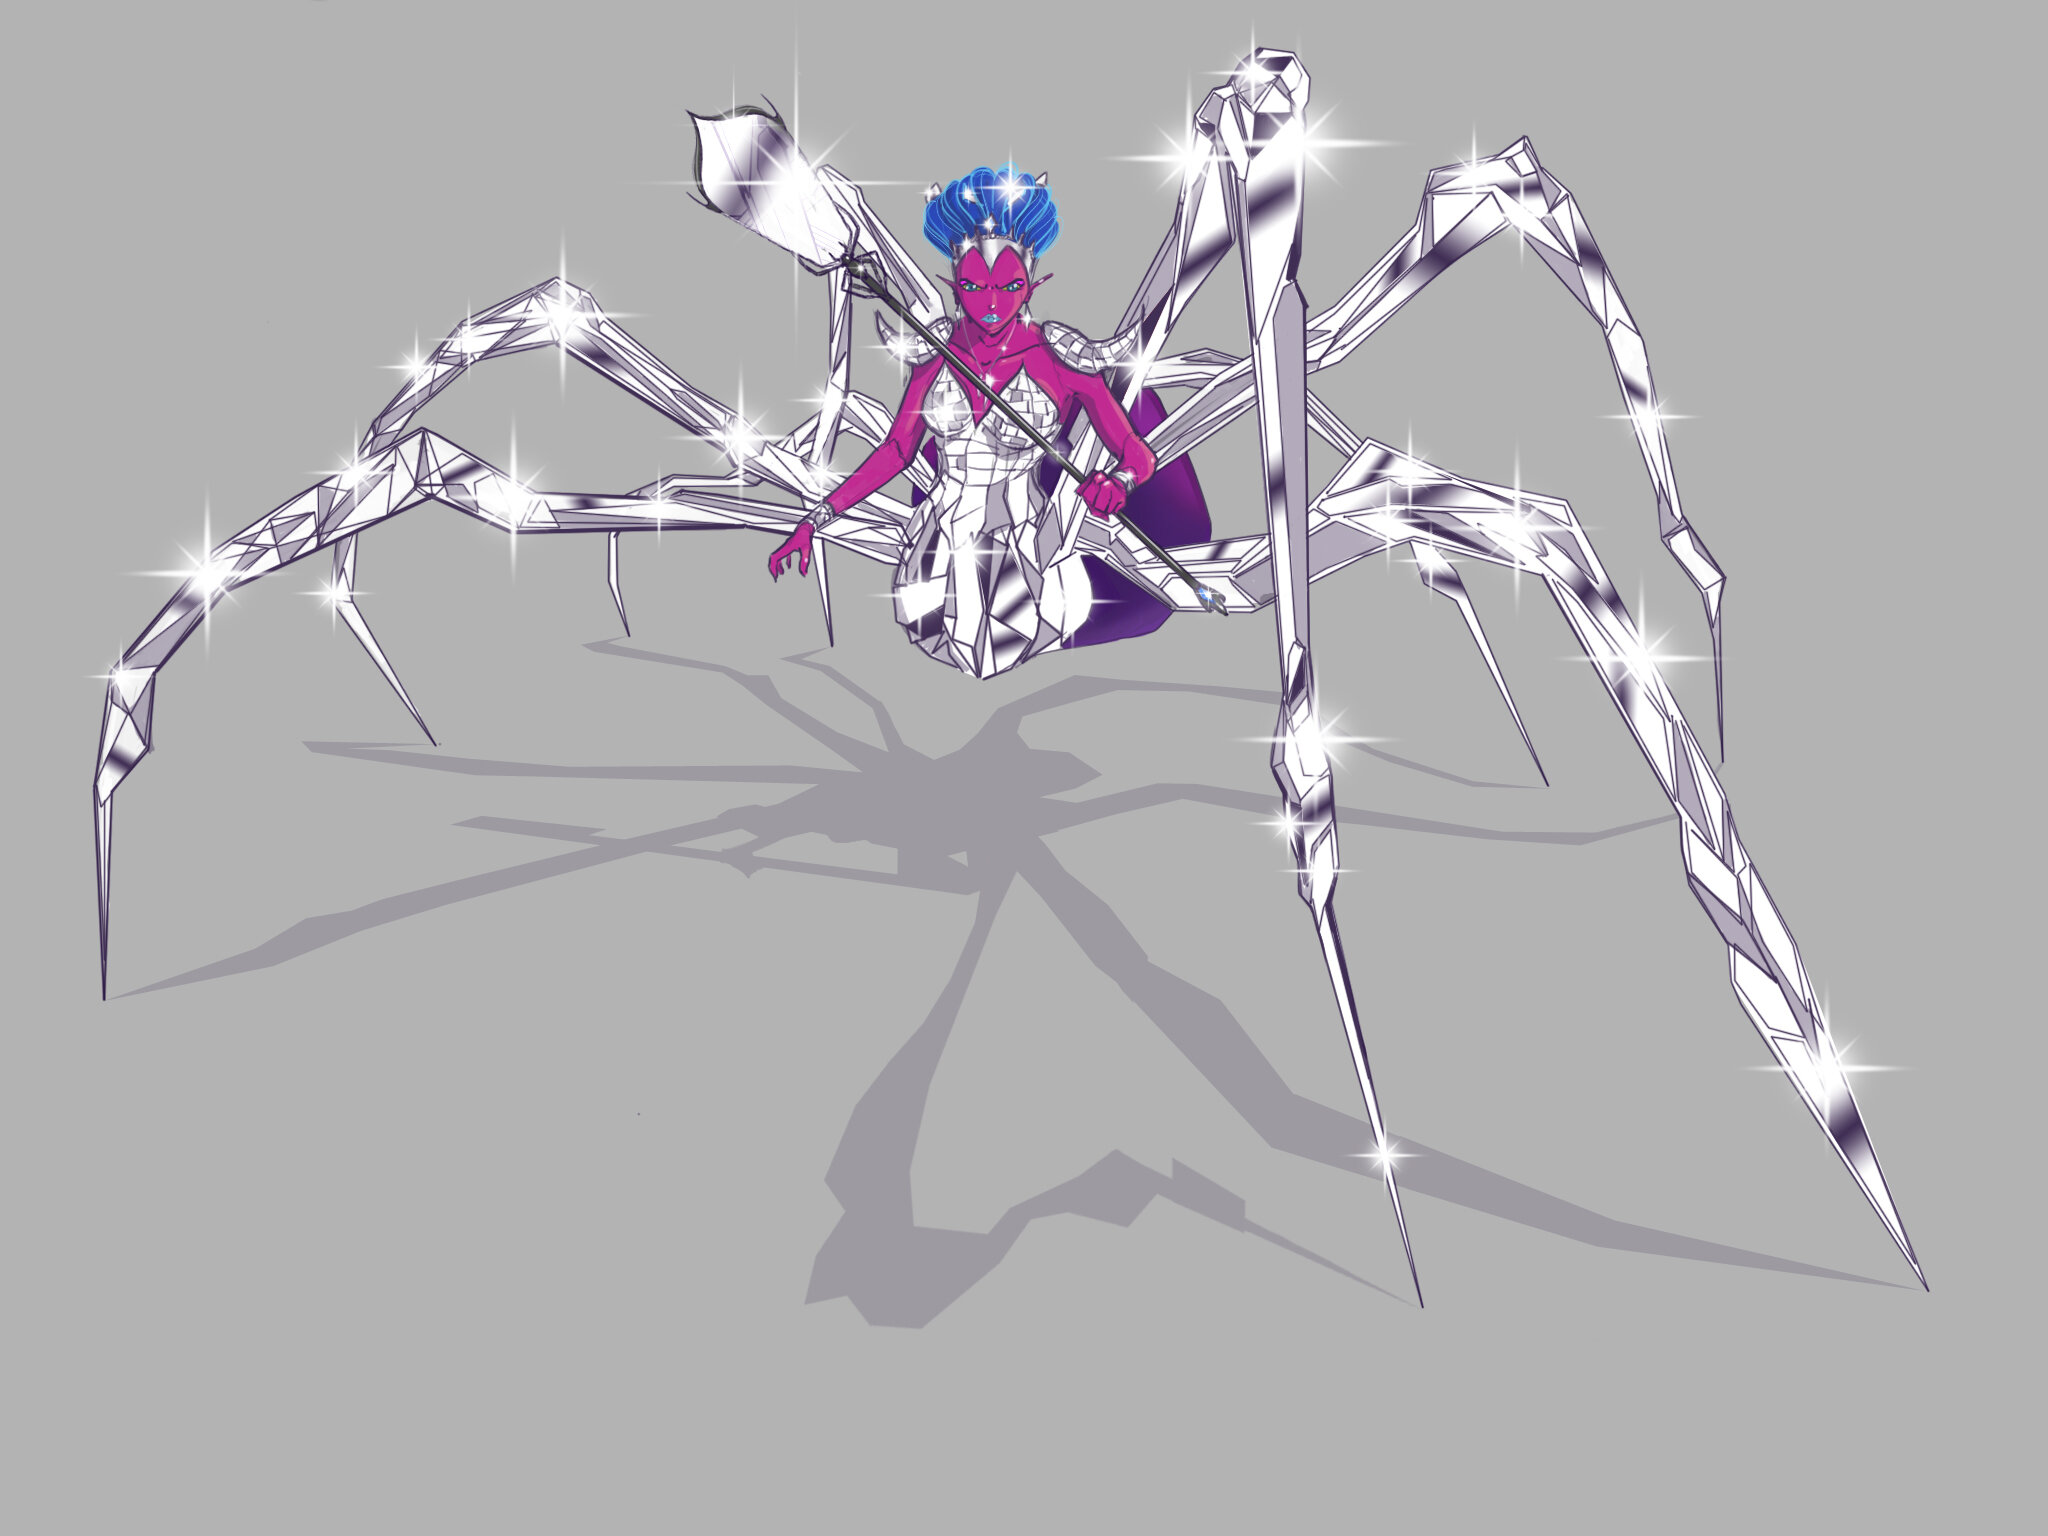  Character design illustration of the show’s villain in her spider form 